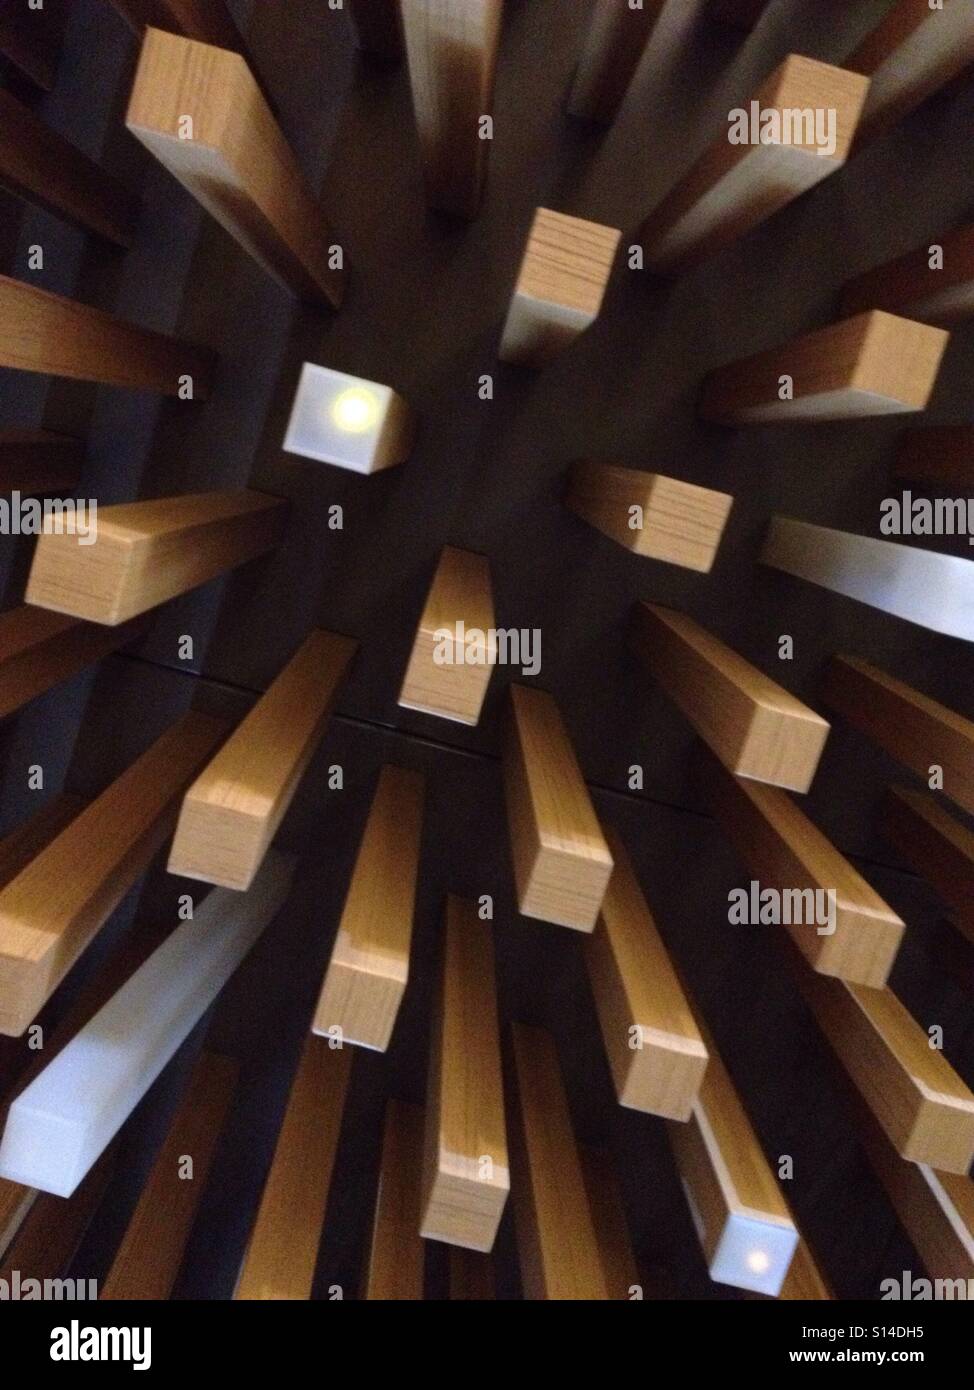 Wood Extrusions Hanging From Ceiling As Part Of Art Exhibit Installation, Amazing Wooden Block Matrix Stock Photo